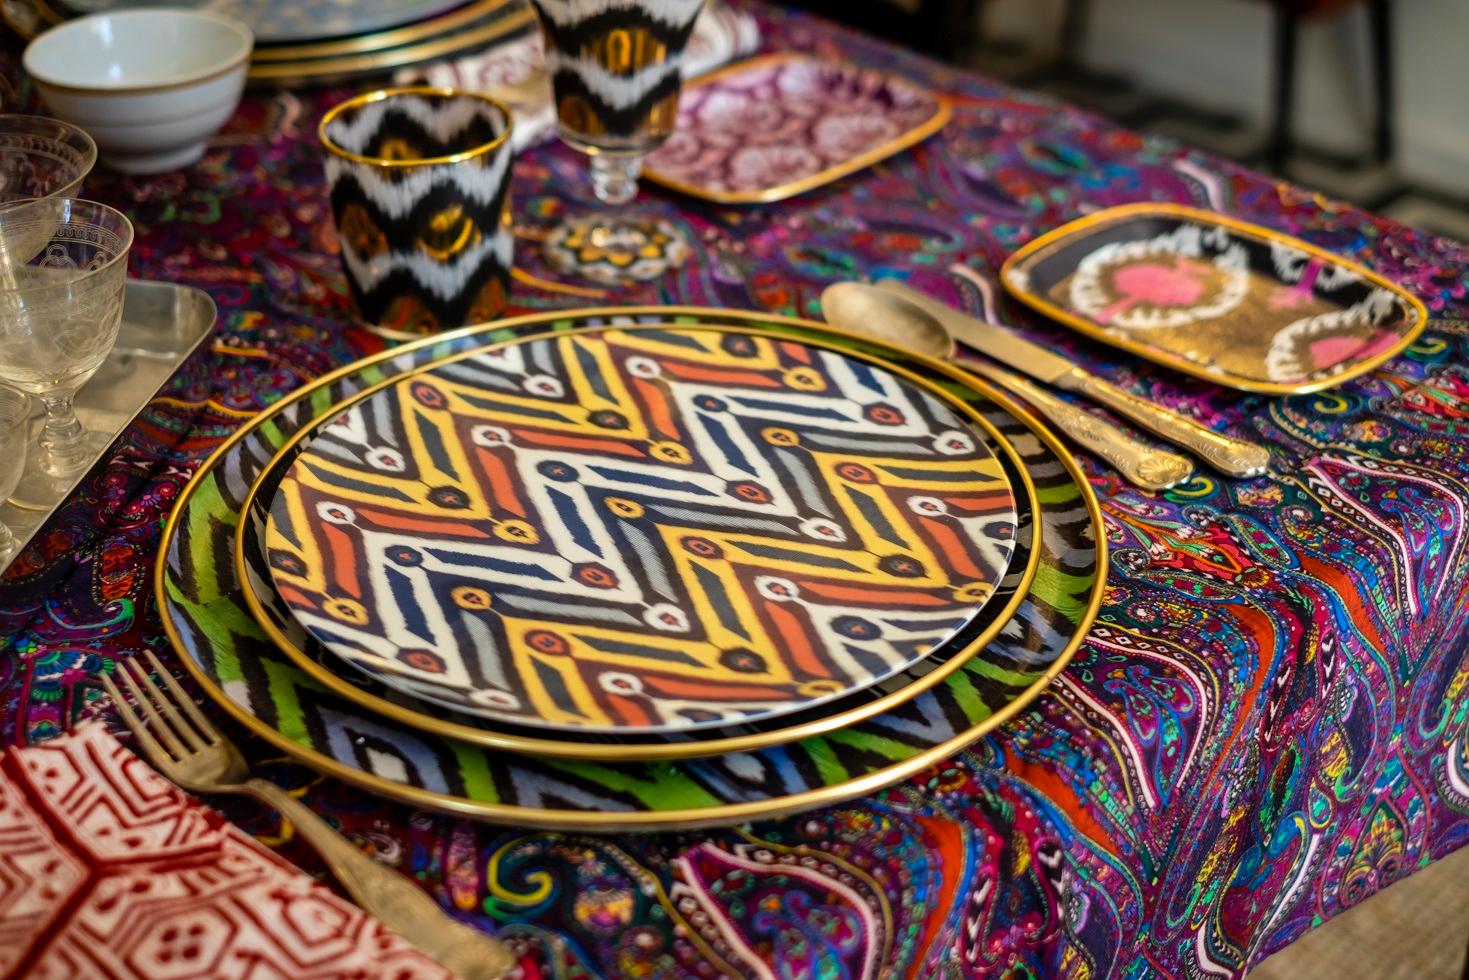 Colors is the trademark of Les-Ottomans and ikat our signature design
Set of 6 dessert plate, made in Italy.